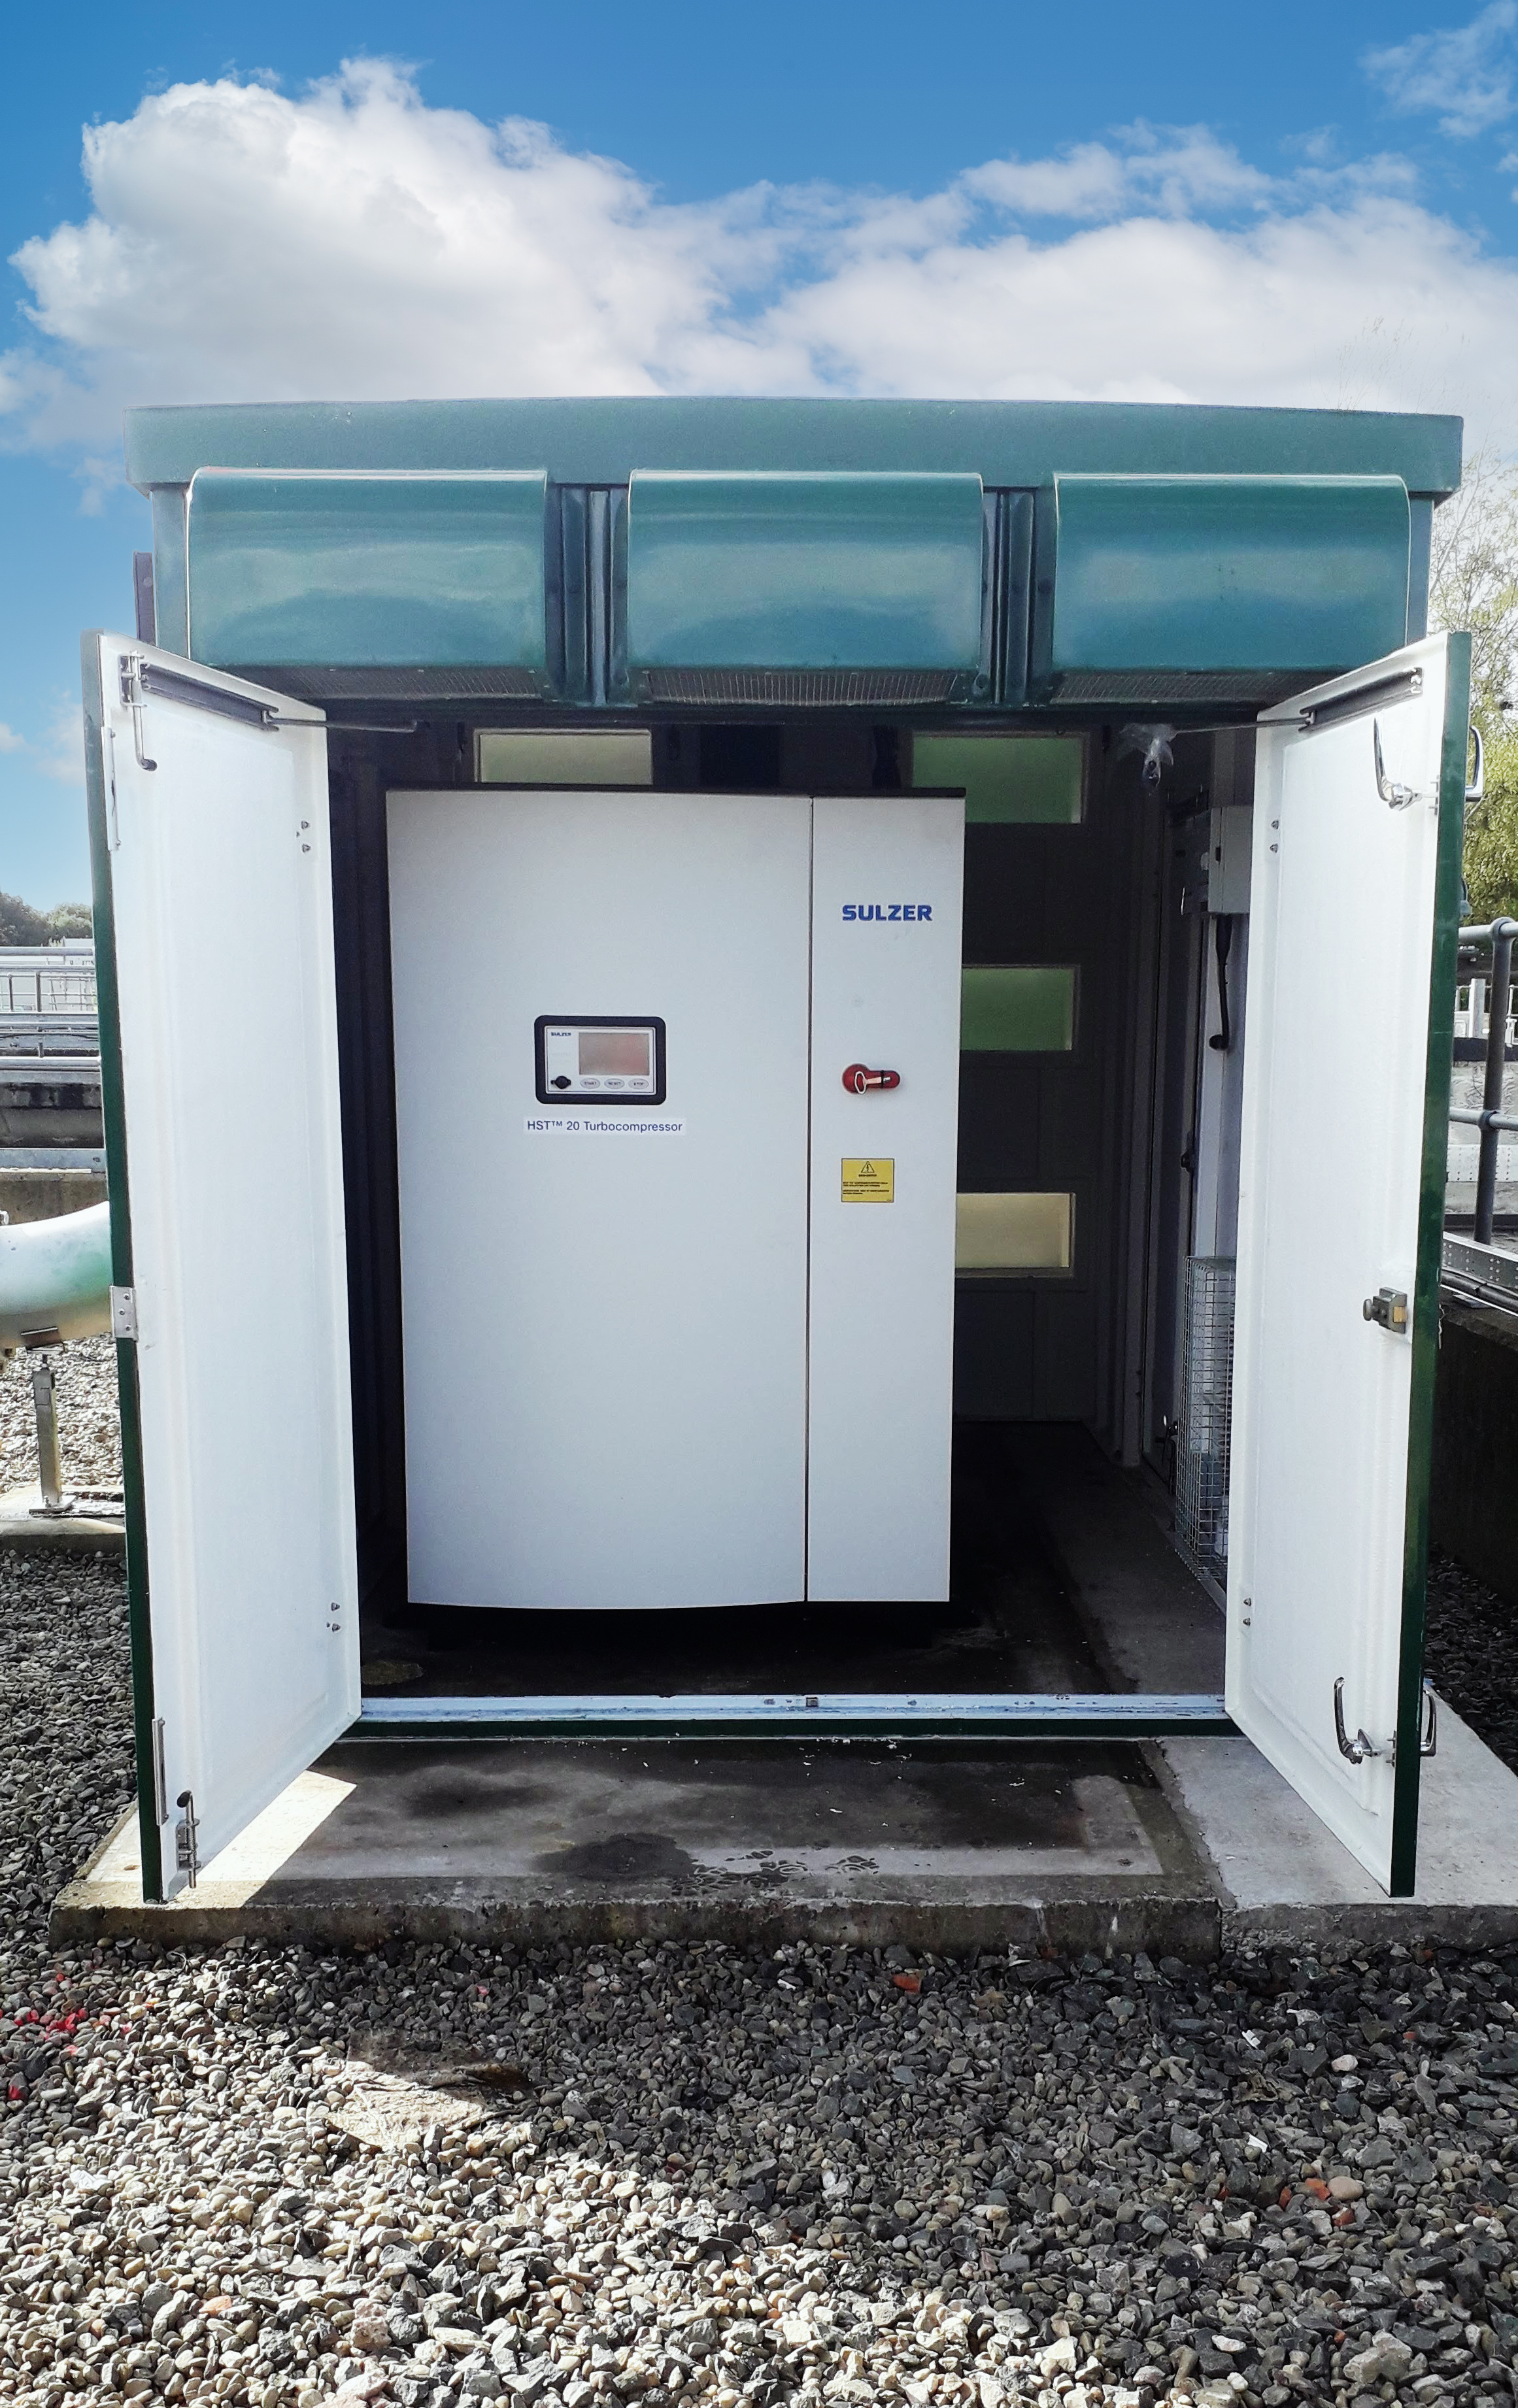 HST turbocompressors installed in bespoke GRP enclosures which offers flexibility and savings on civil works costs.